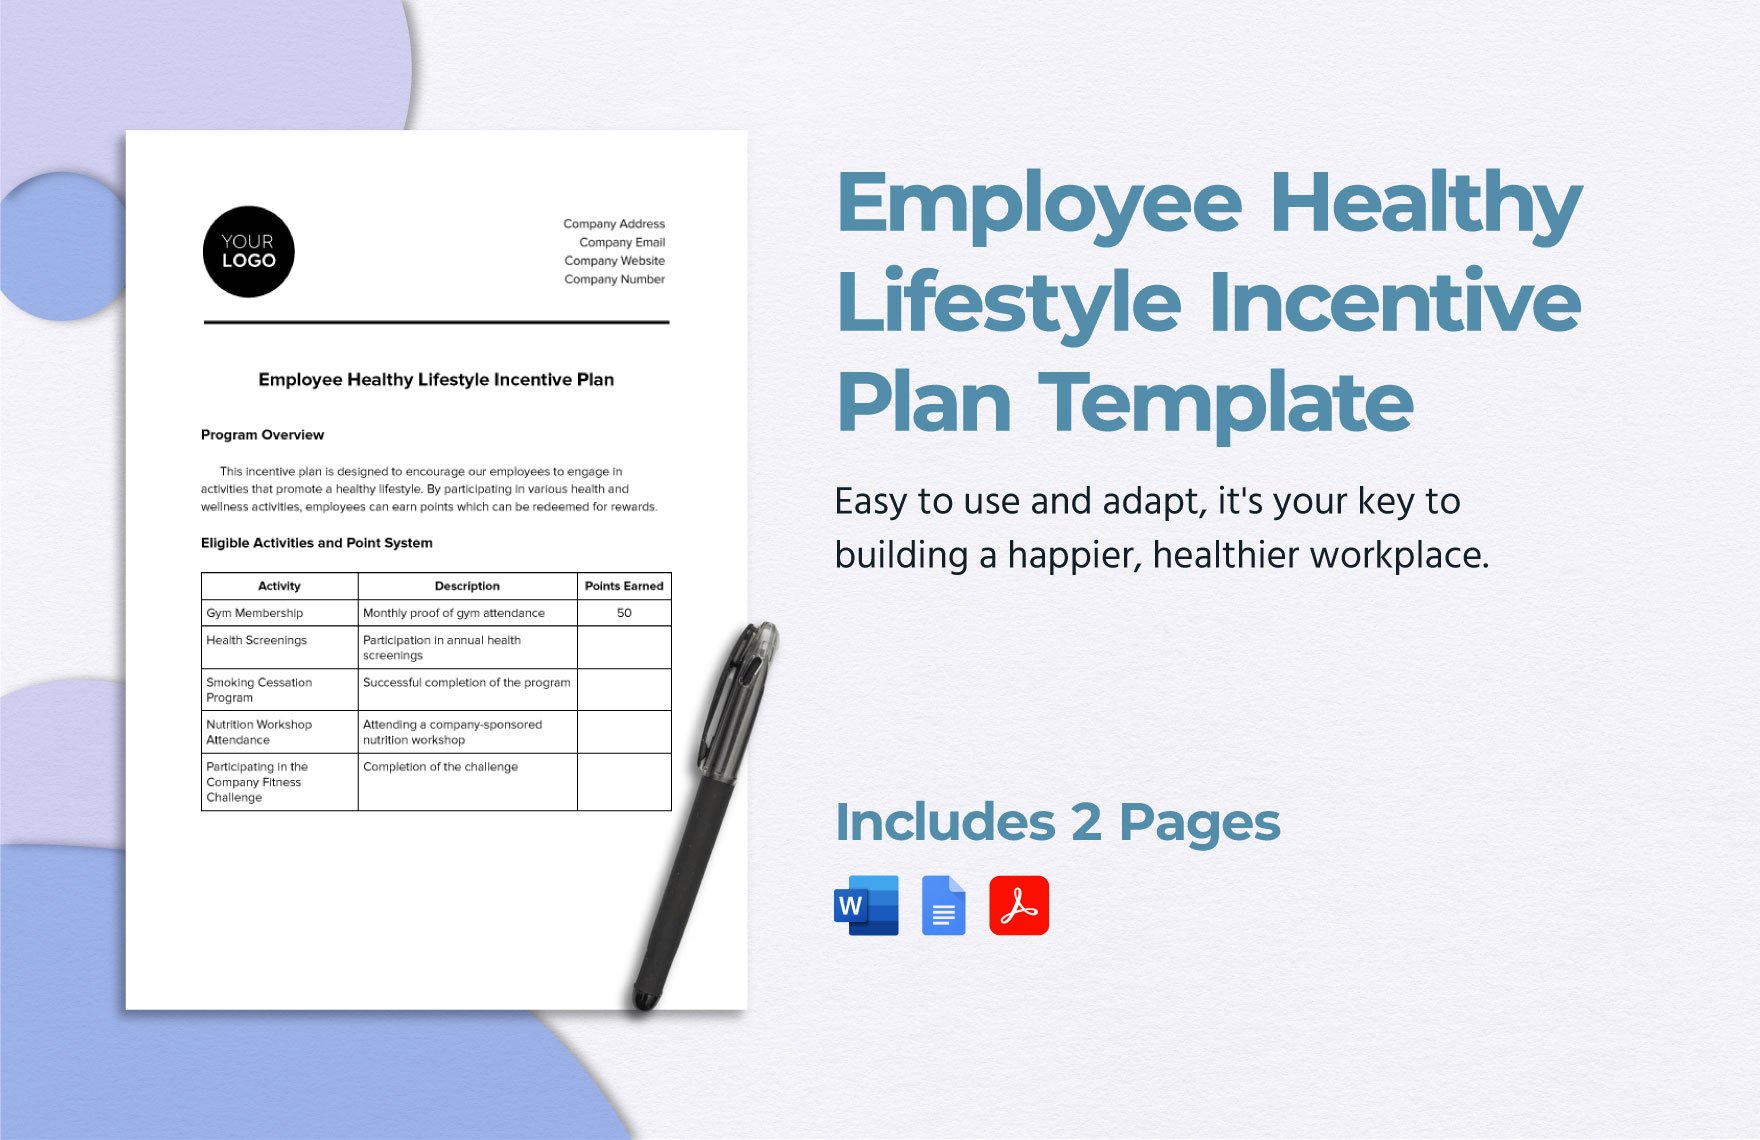 Employee Healthy Lifestyle Incentive Plan Template